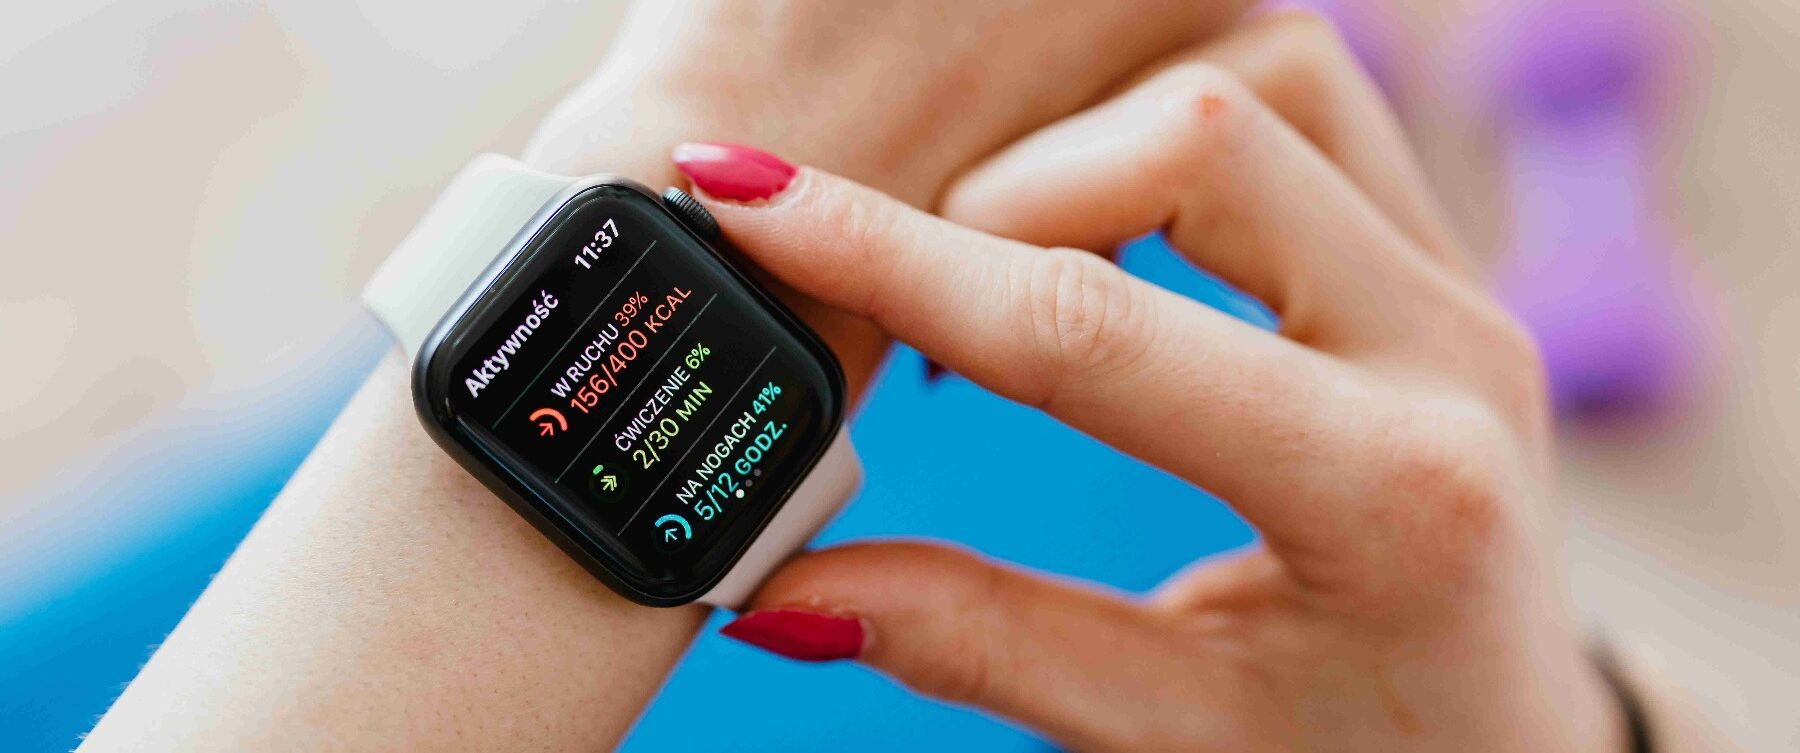 one of the best health apps is smart watch